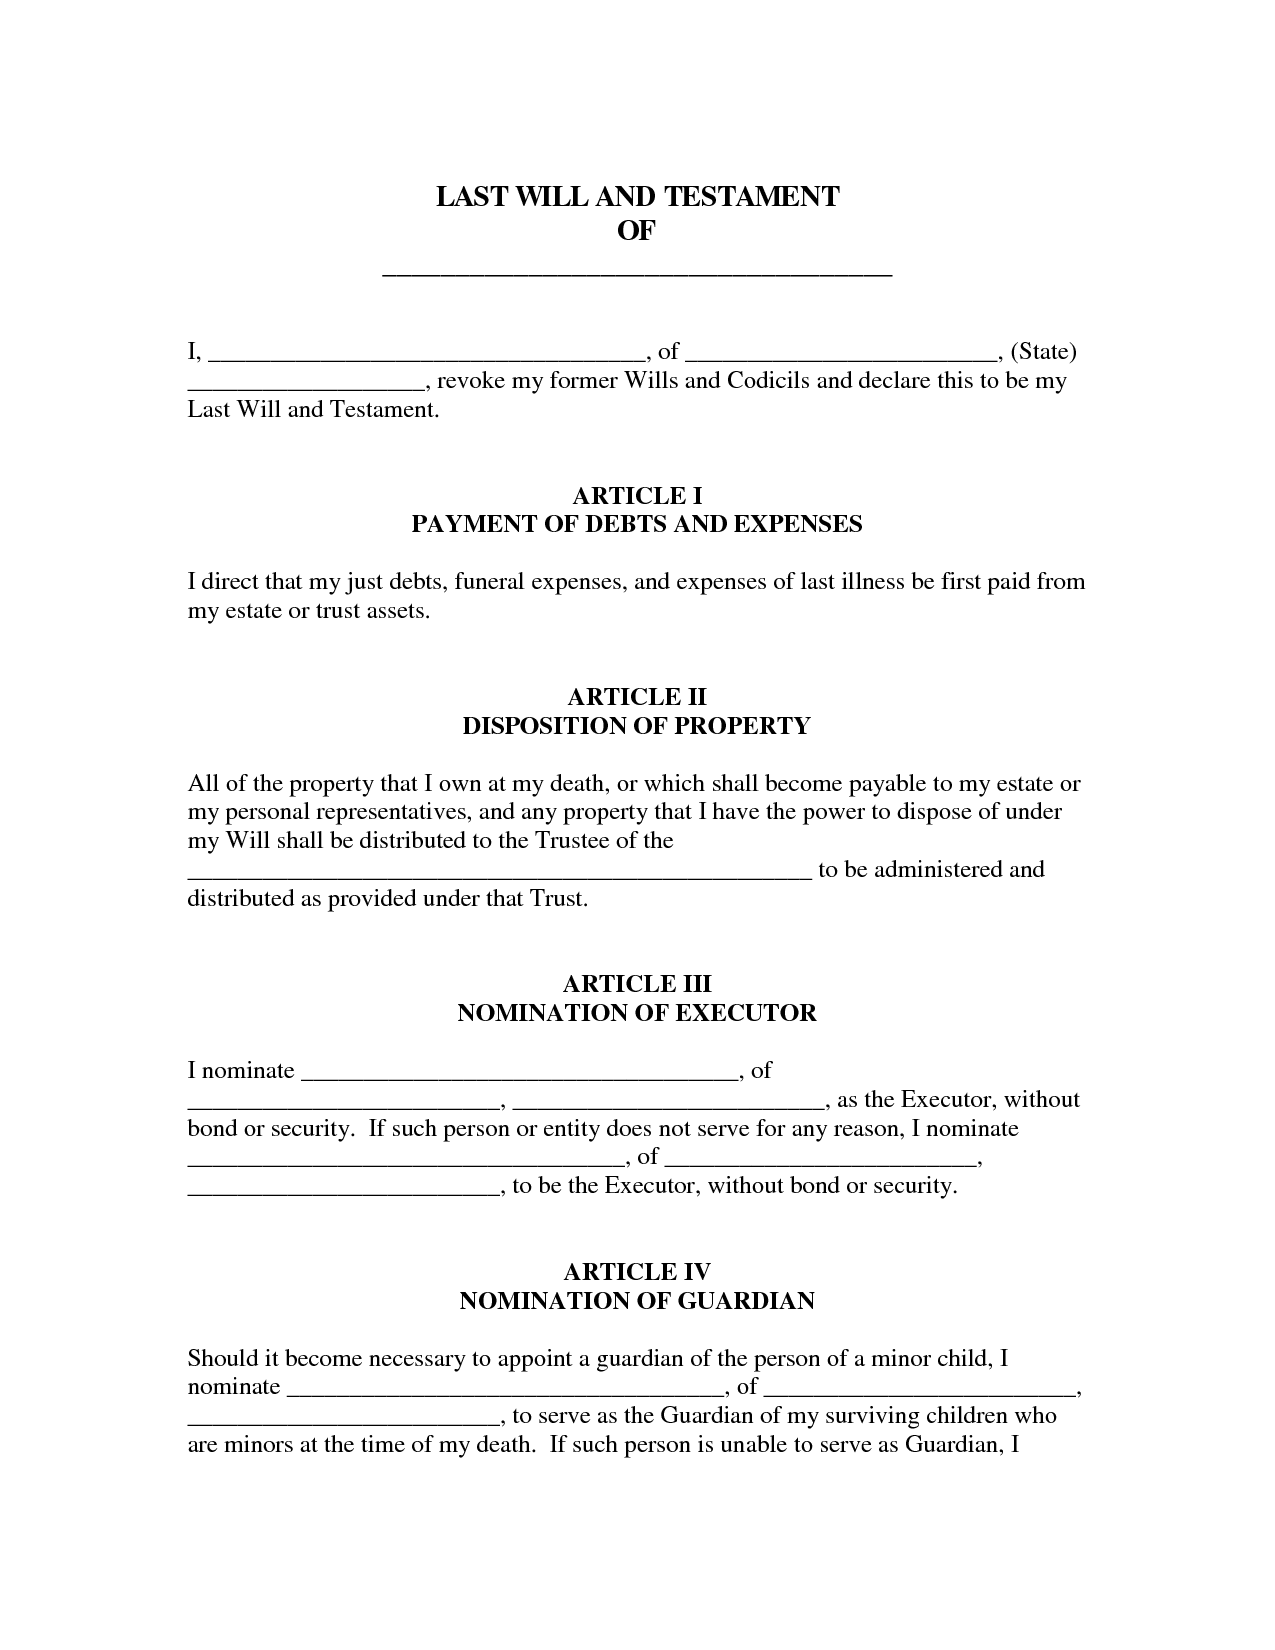 last-will-and-testament-printable